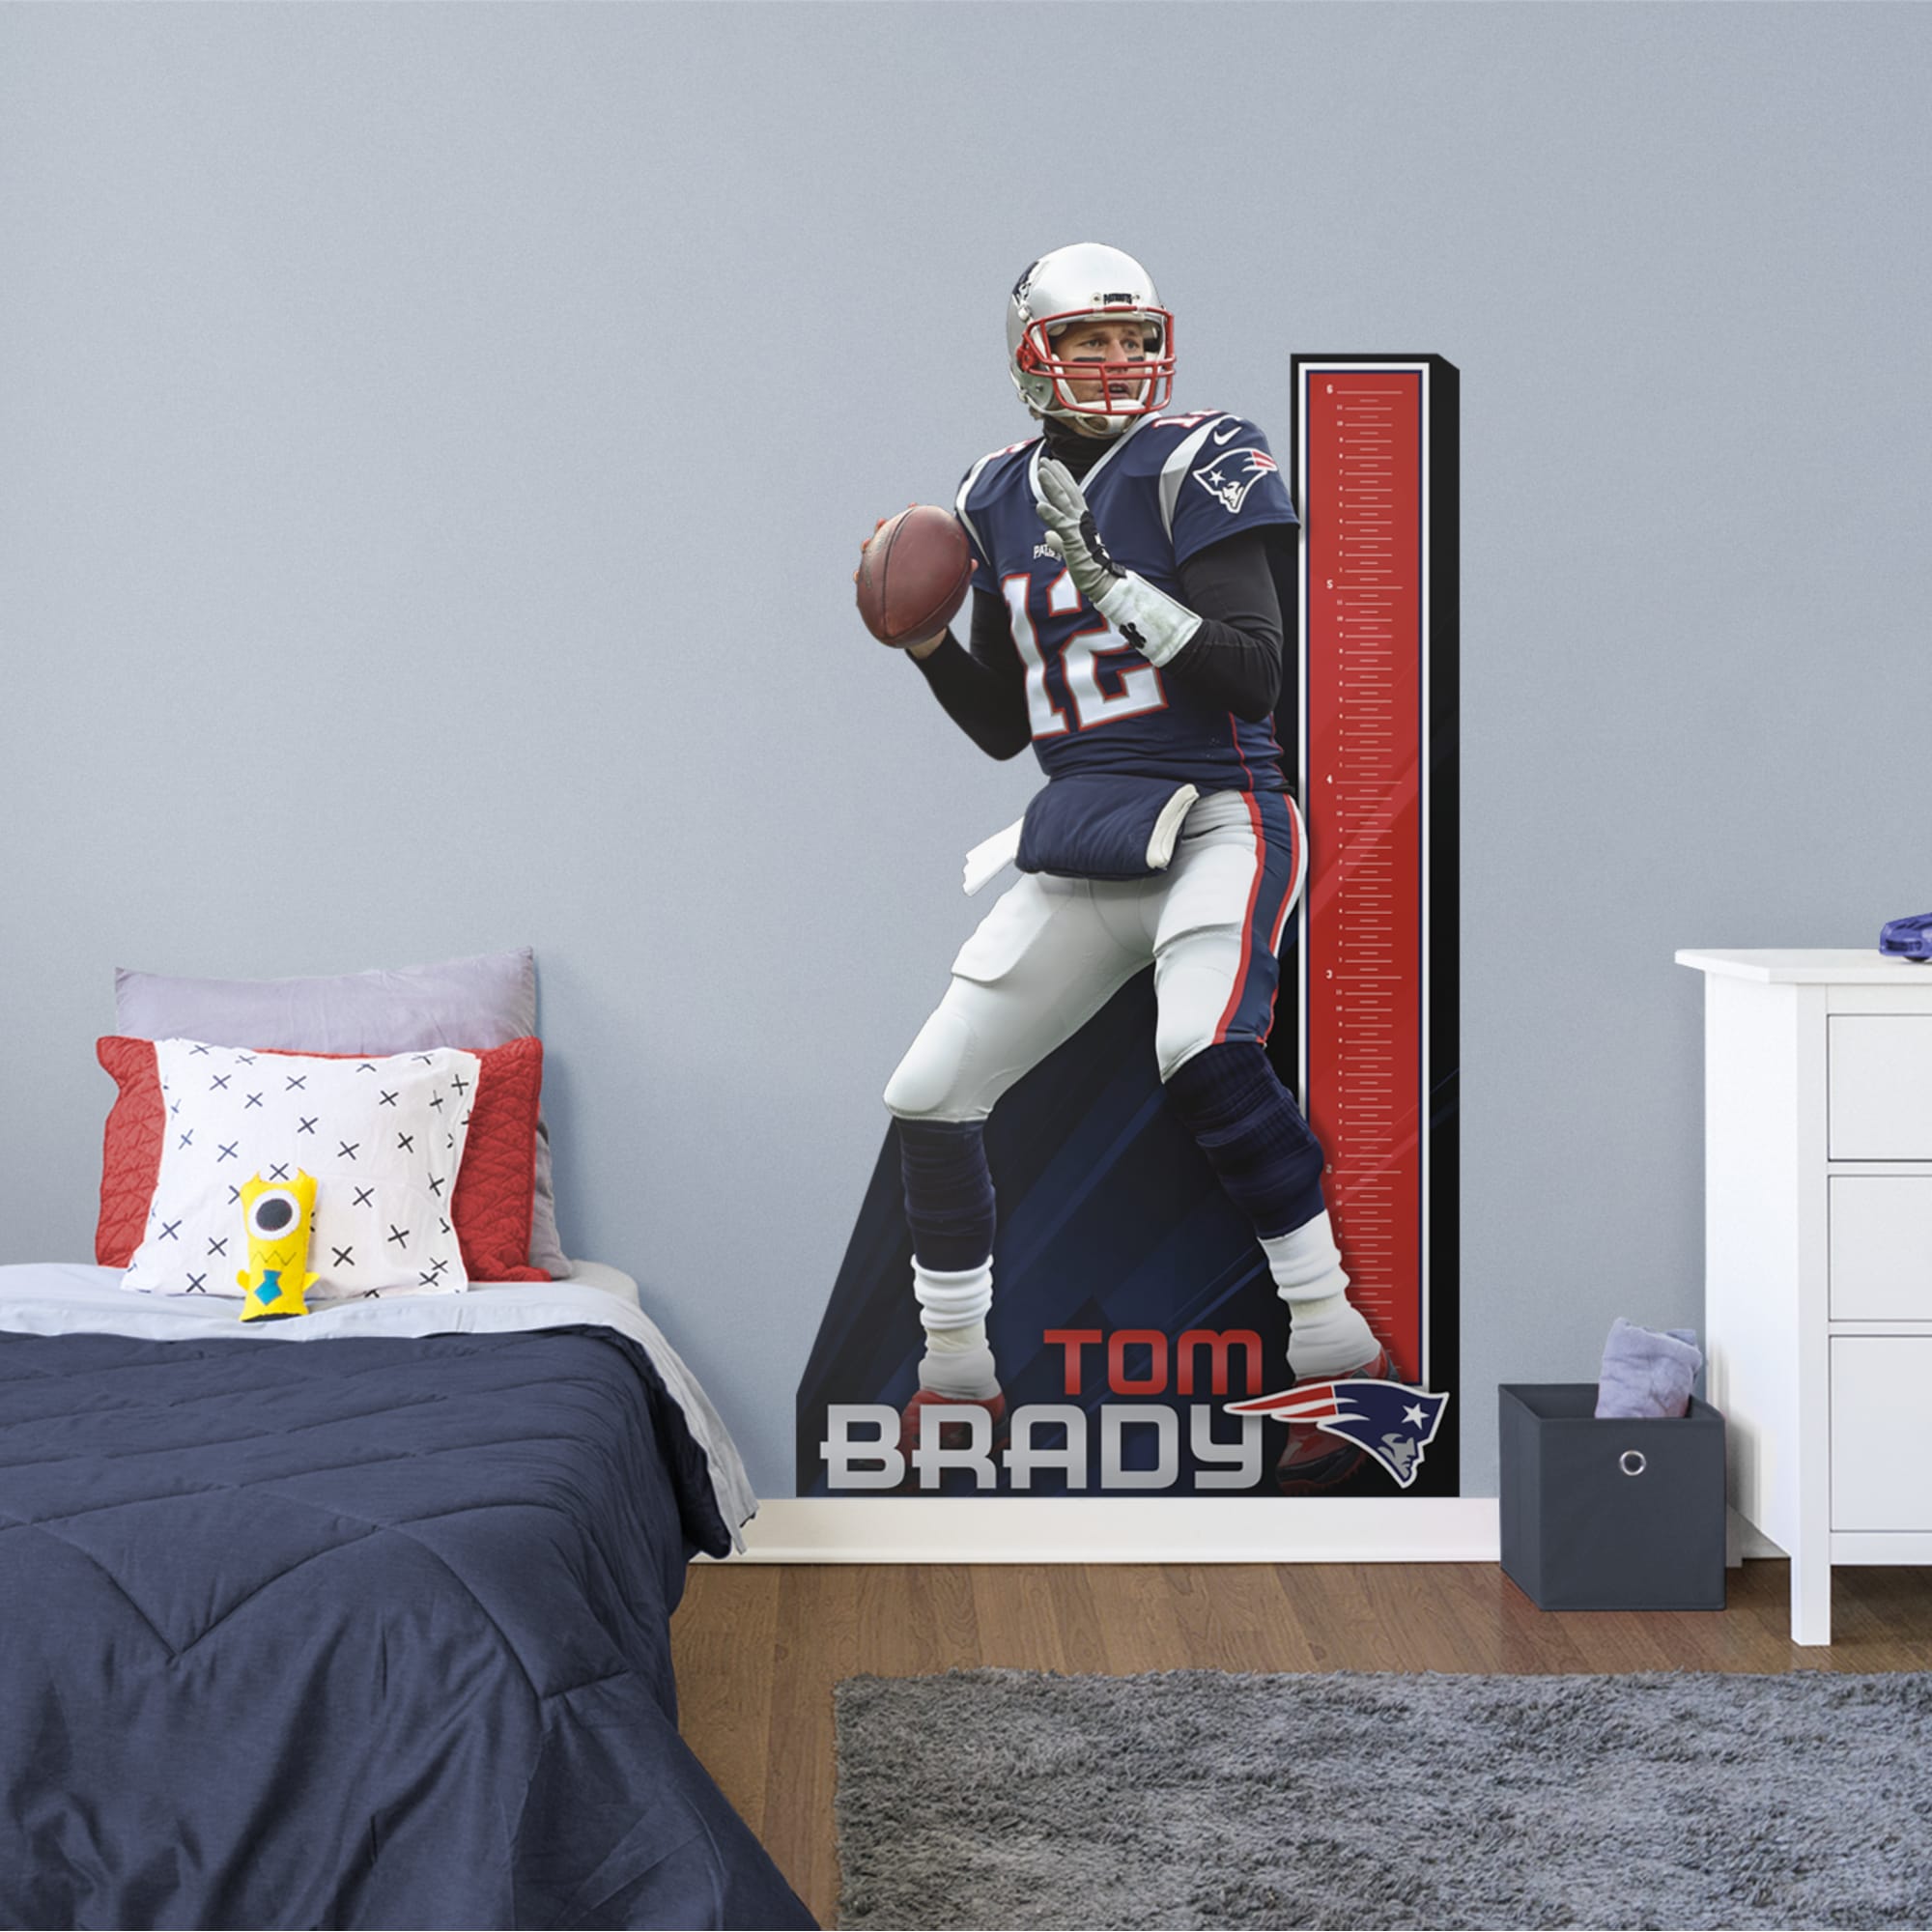 Tom Brady for New England Patriots: Growth Chart - Officially Licensed NFL Removable Wall Decal 41.0"W x 77.0"H by Fathead | Vin